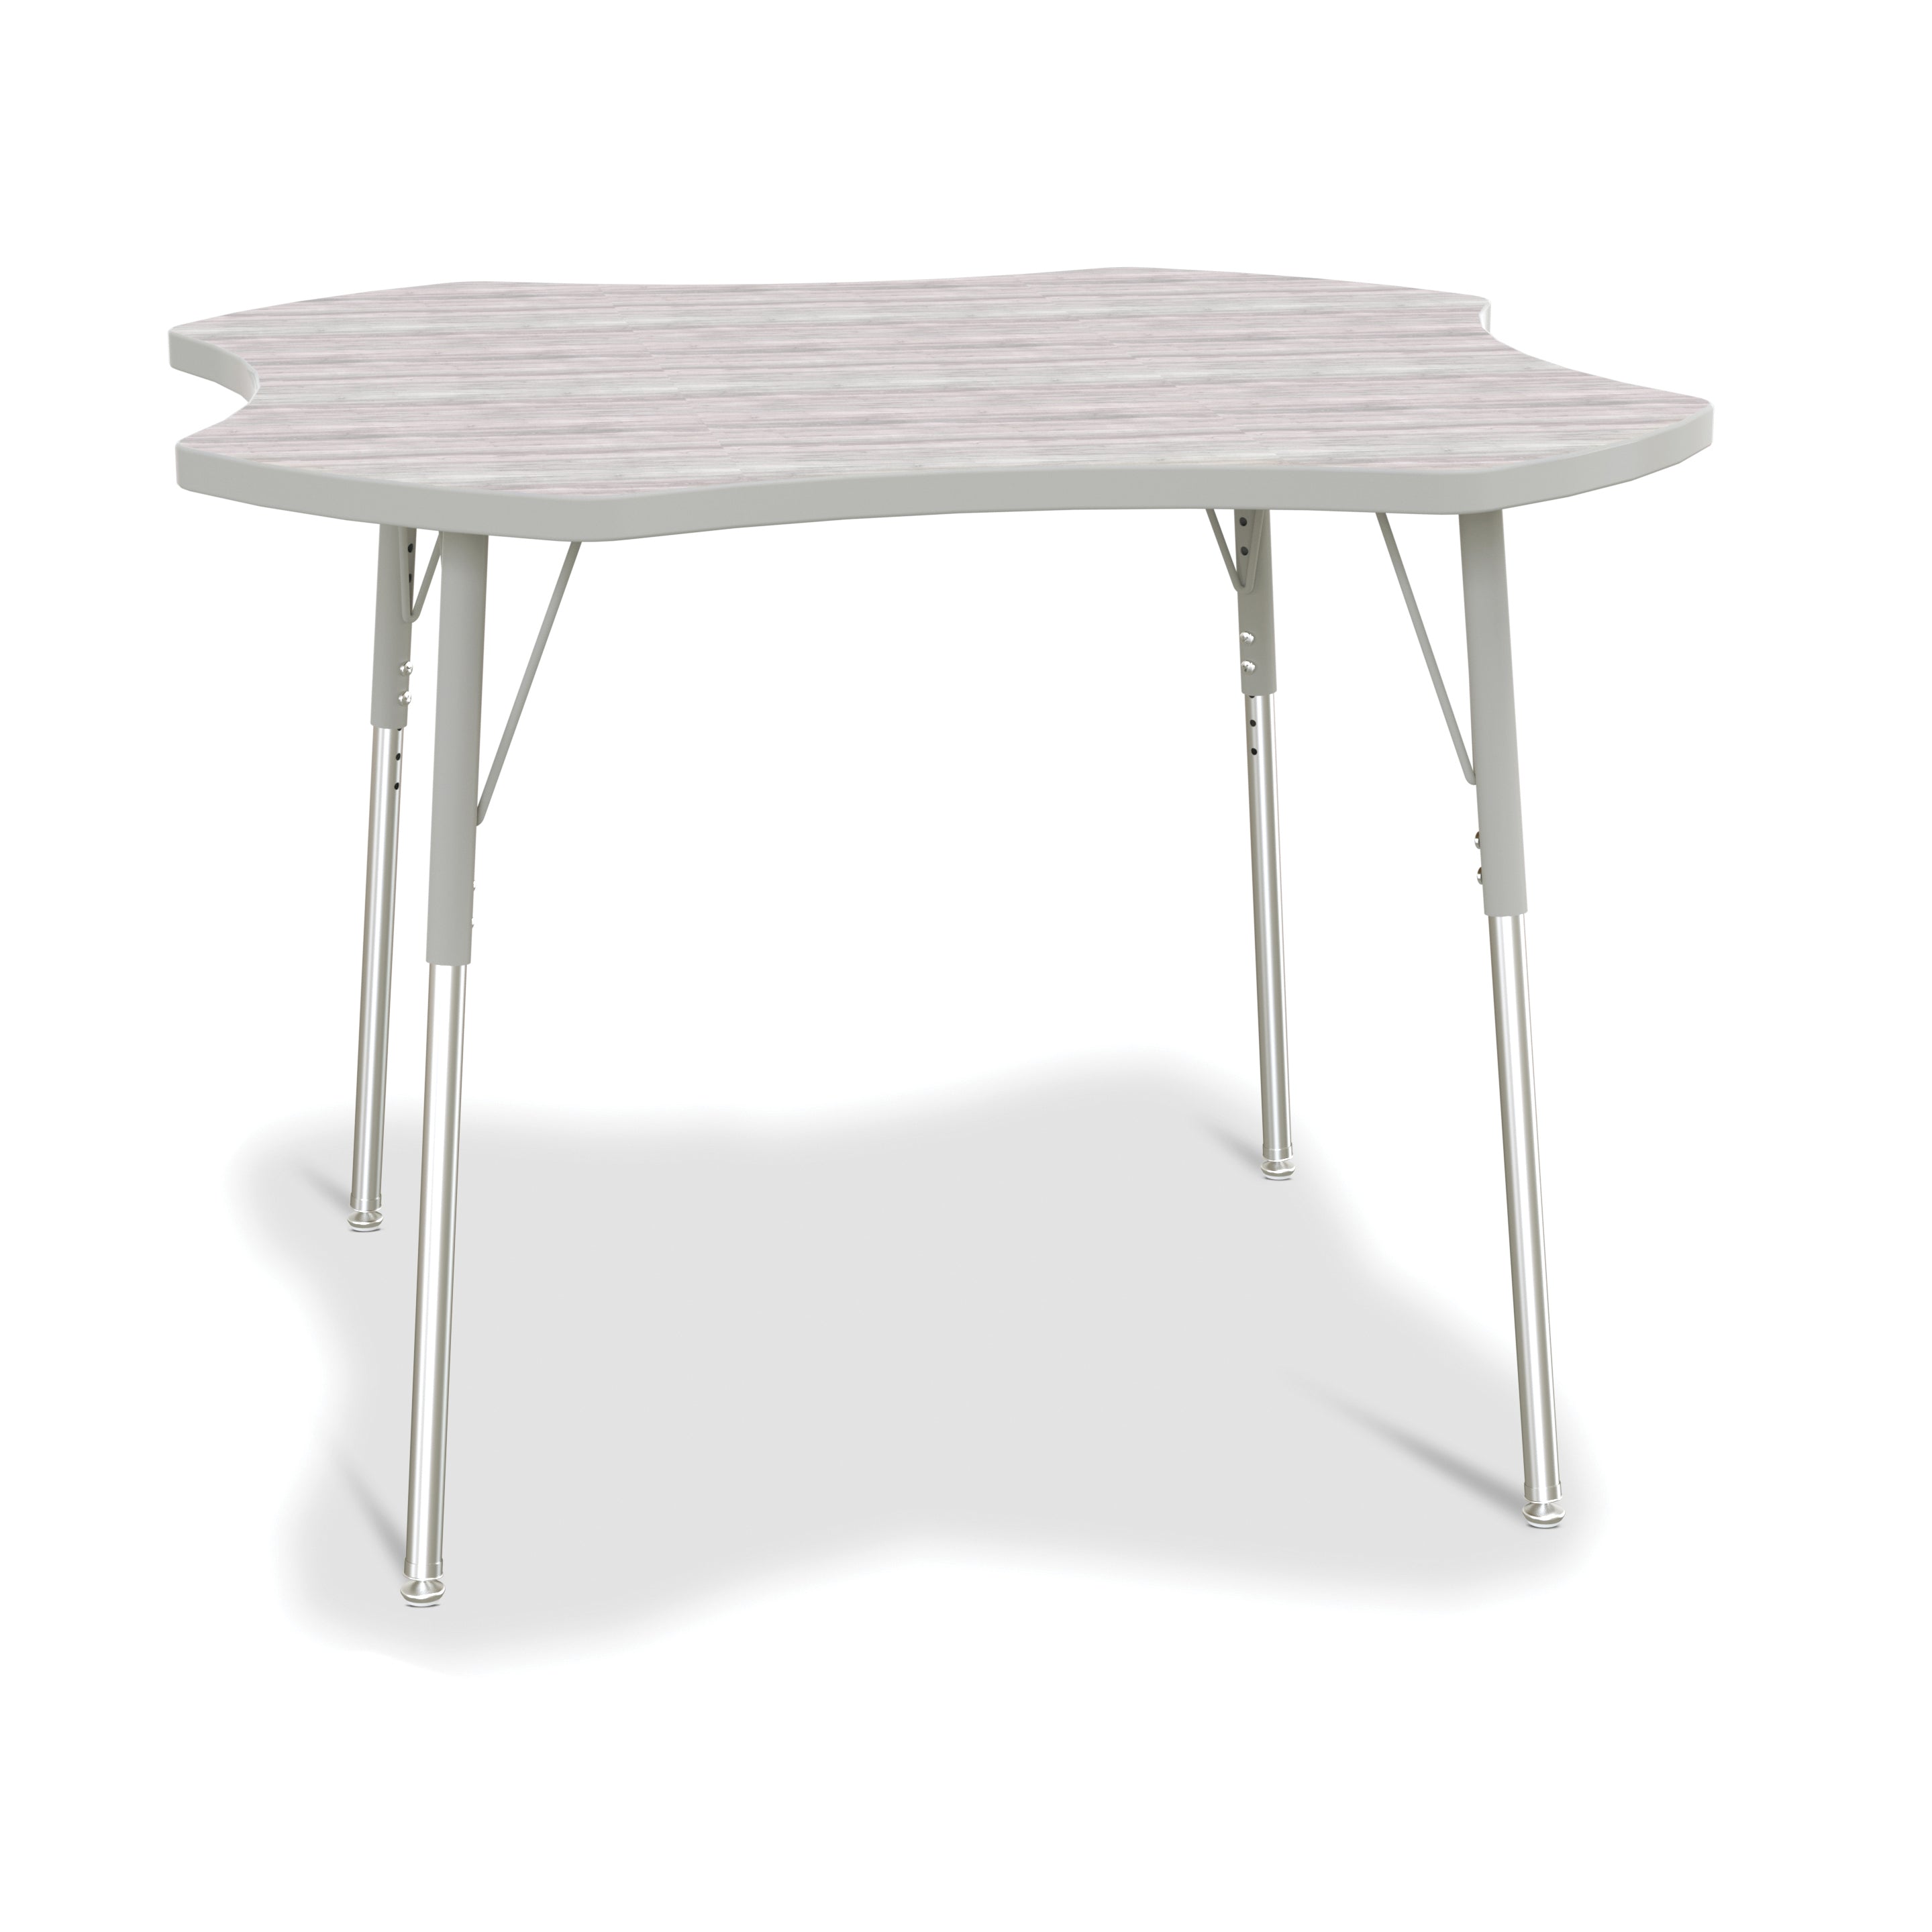 6453JCA450, Berries Four Leaf Activity Table - A-height - Driftwood Gray/Gray/Gray